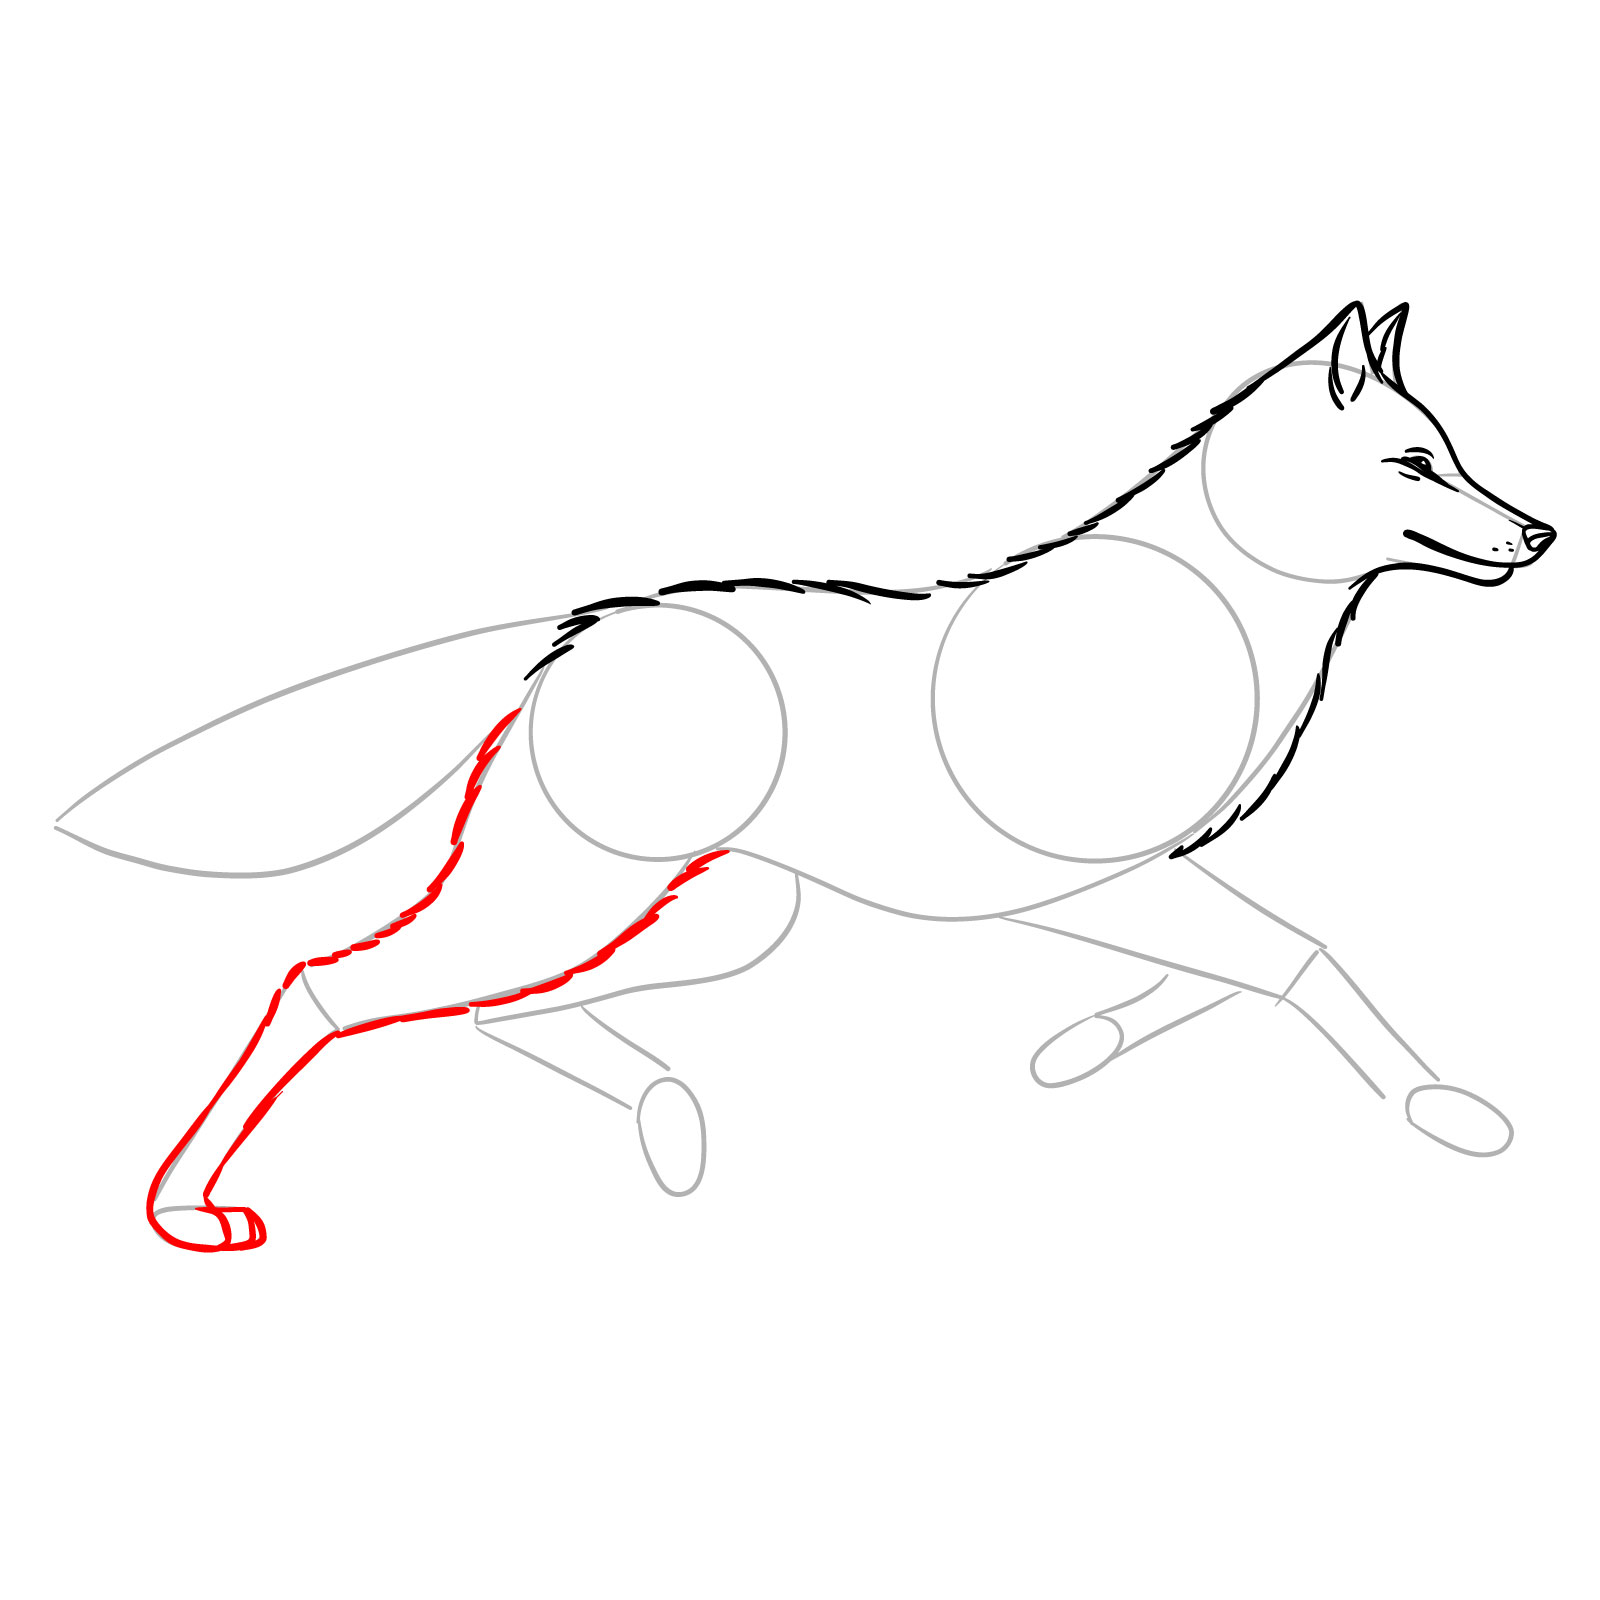 Sketching the hind leg of a wolf in motion for a running wolf drawing - step 07